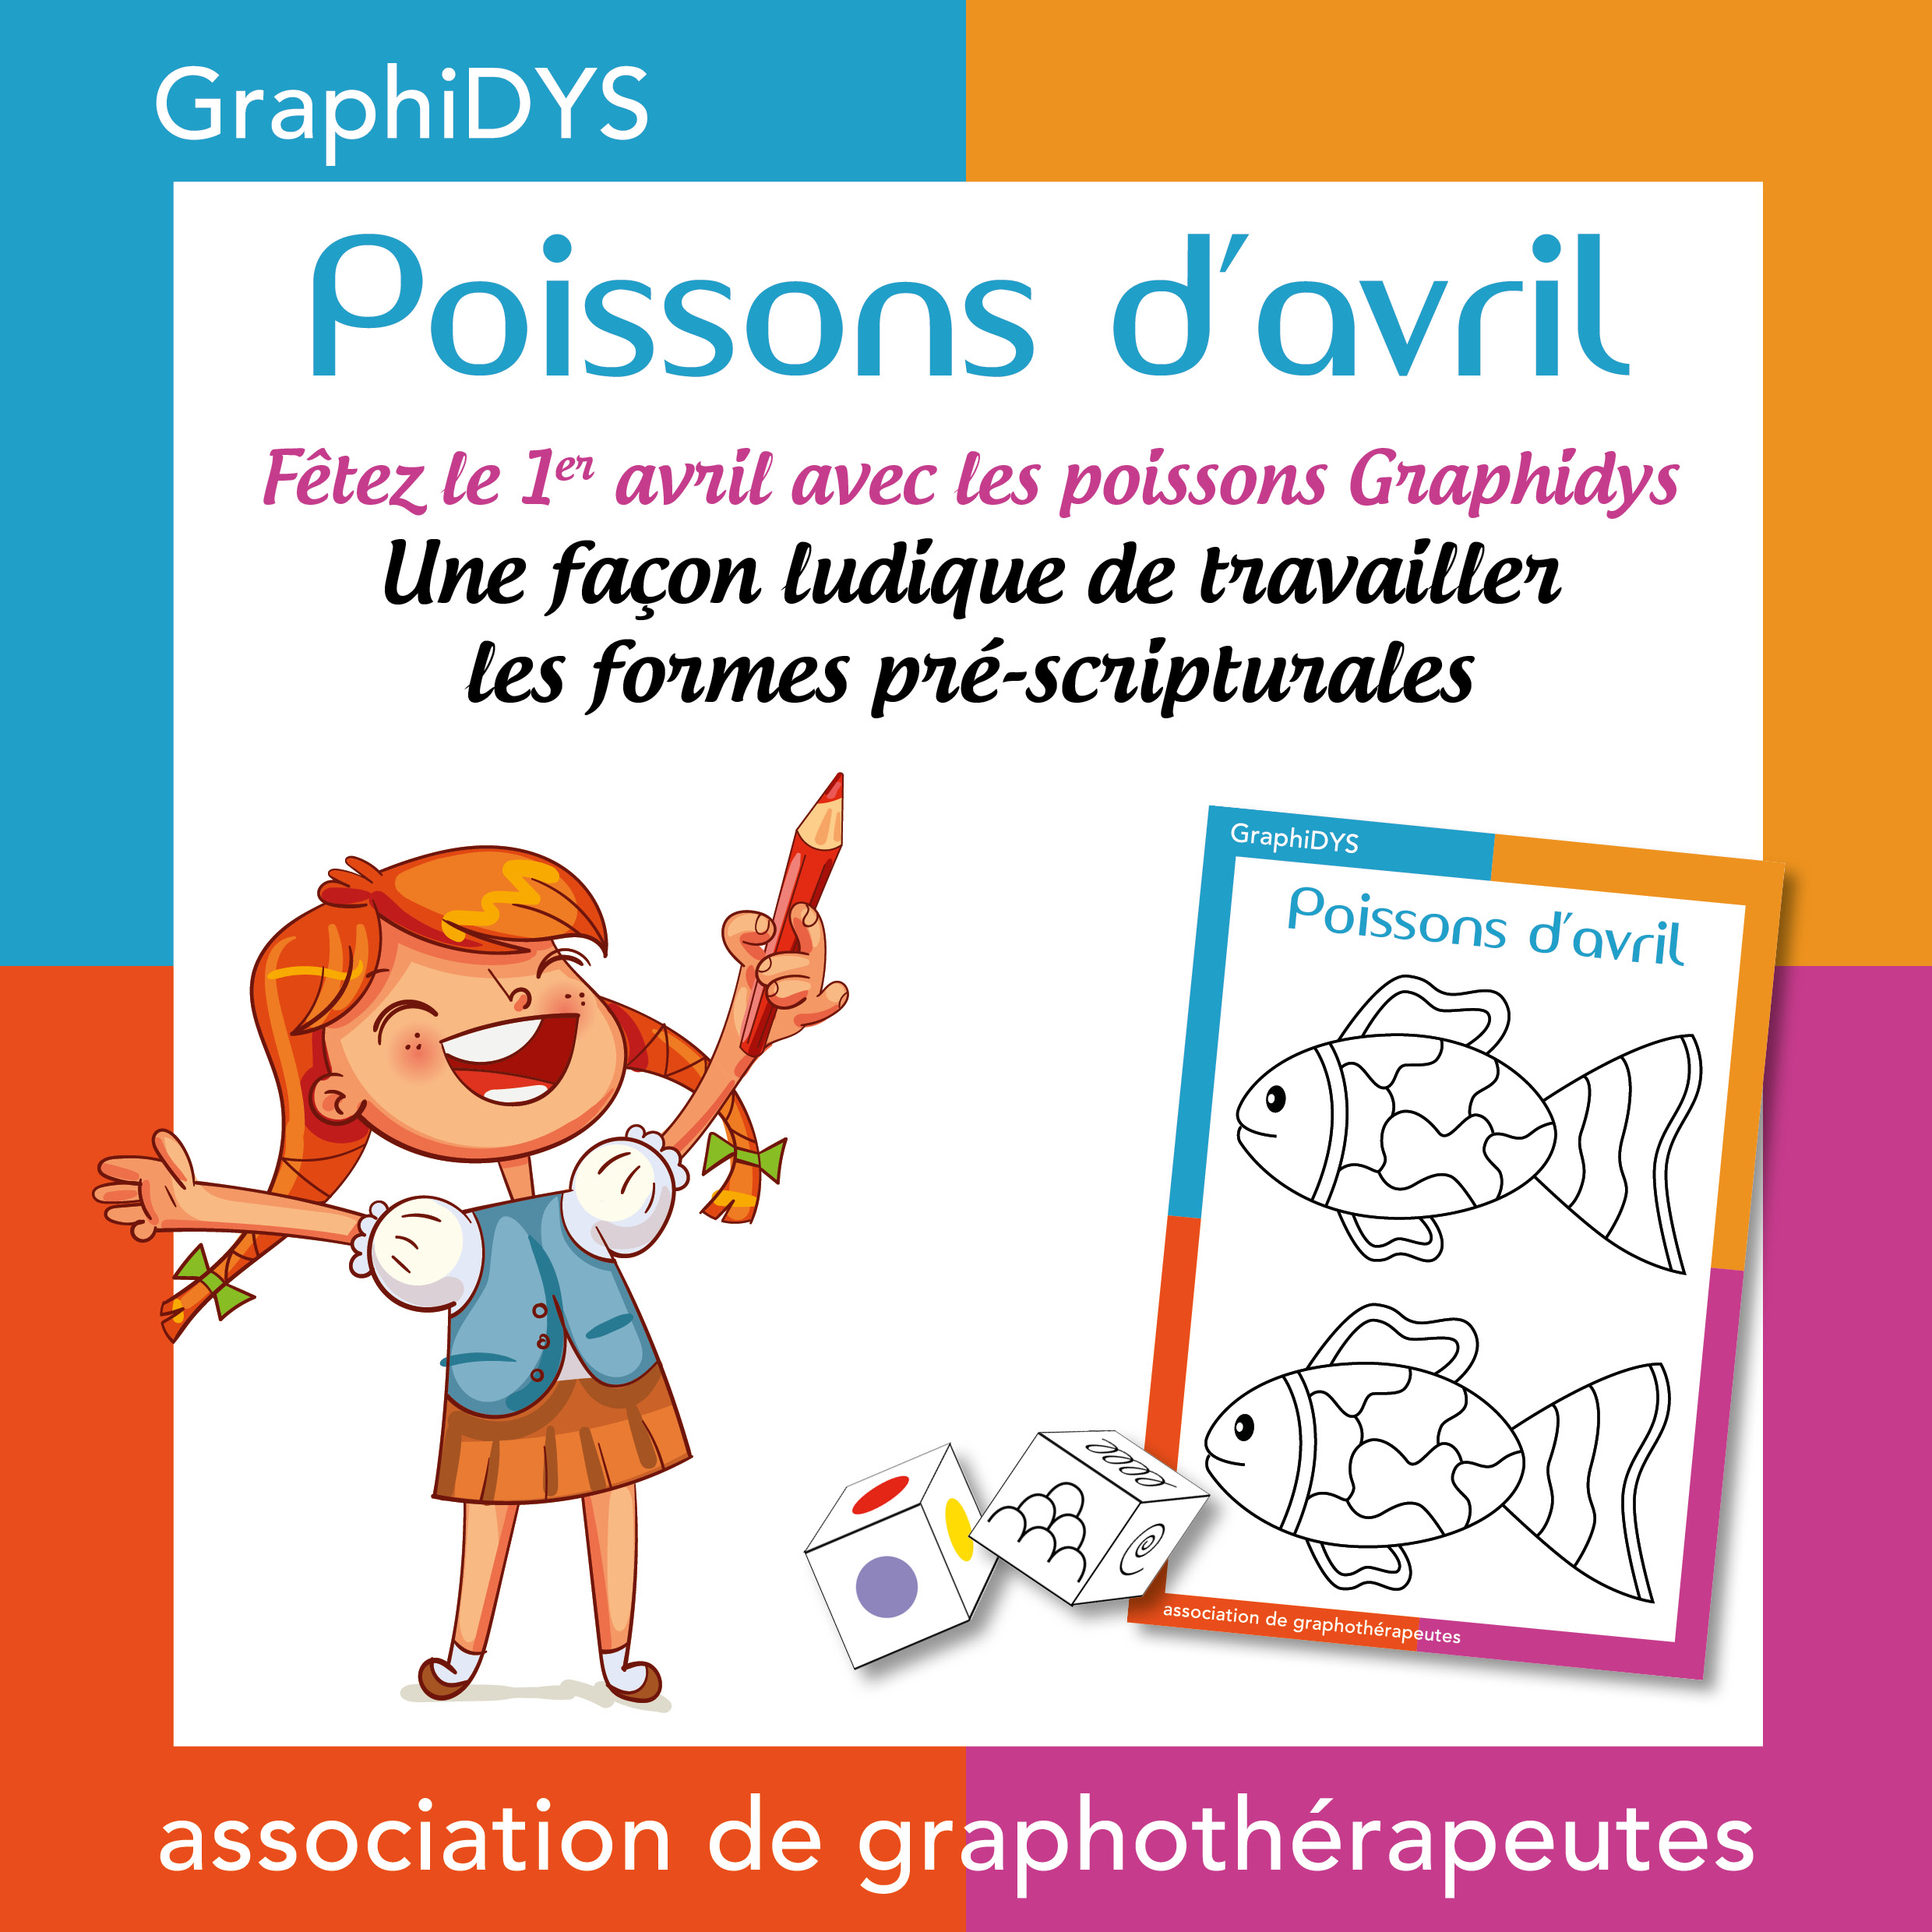 Image Carousel Graphidys Poissons d'avril !! 